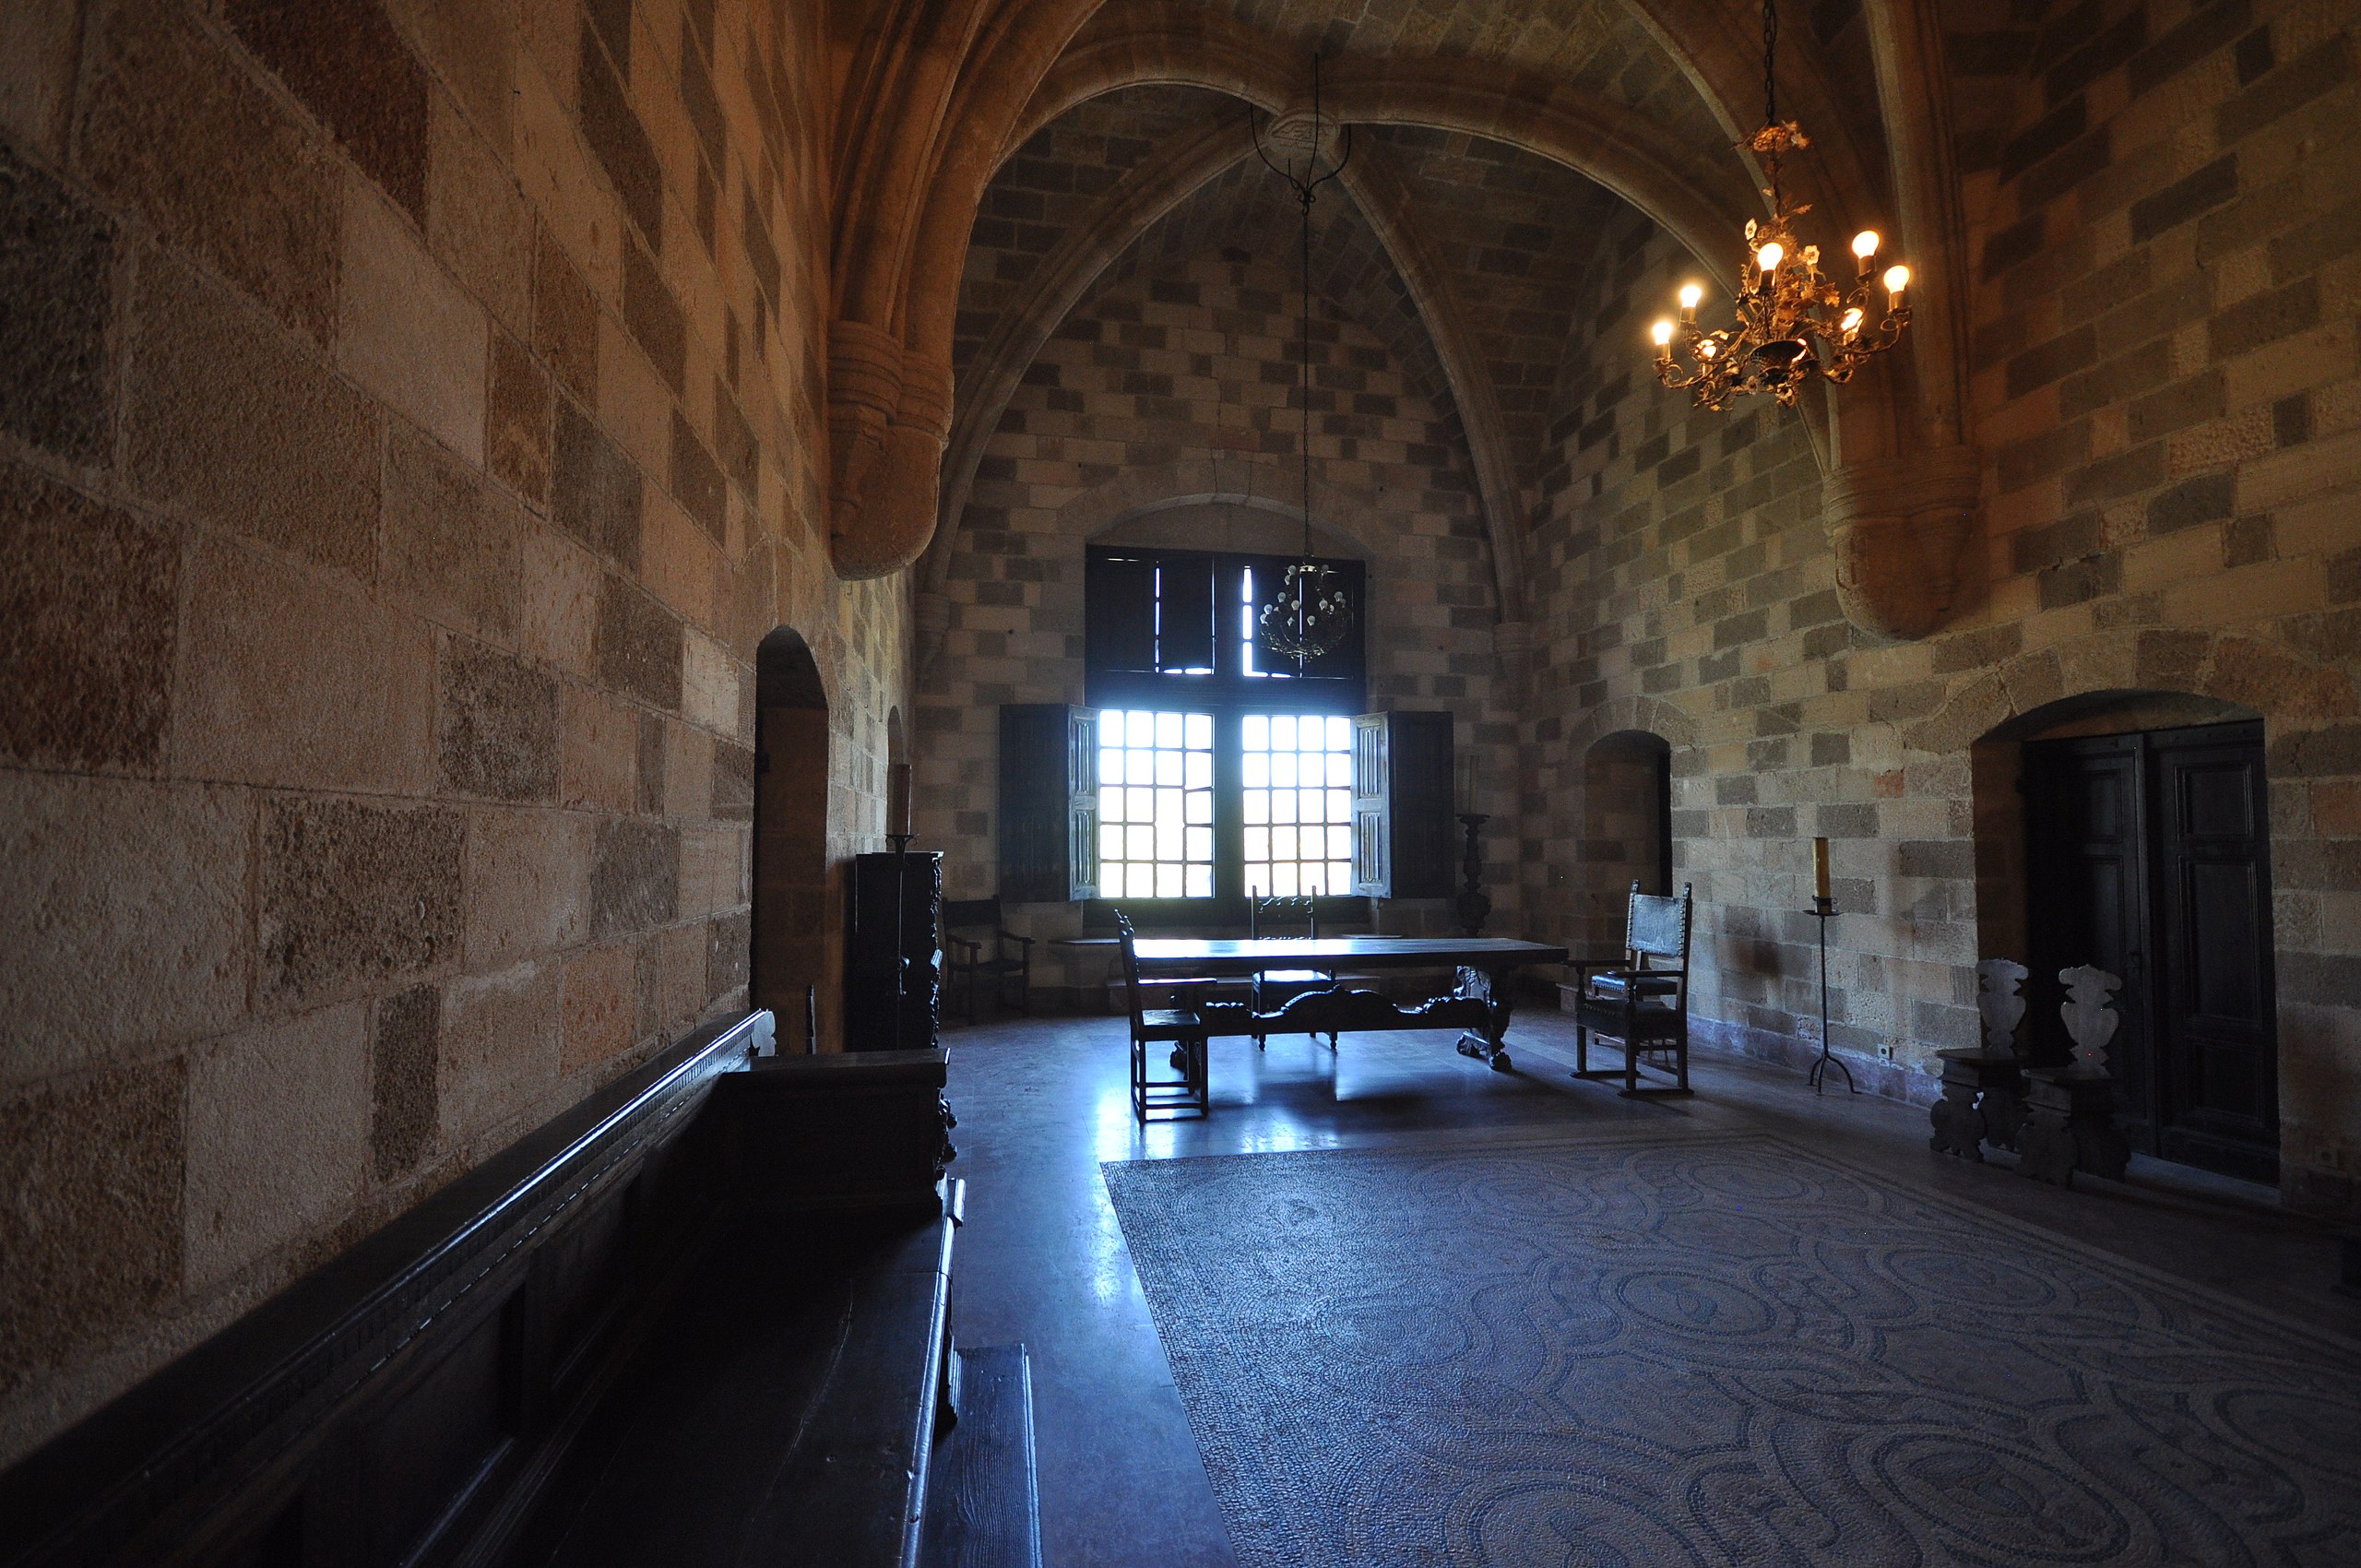 File:Palace of the Grand Master of the Knights of Rhodes (9451883053).jpg -  Wikimedia Commons